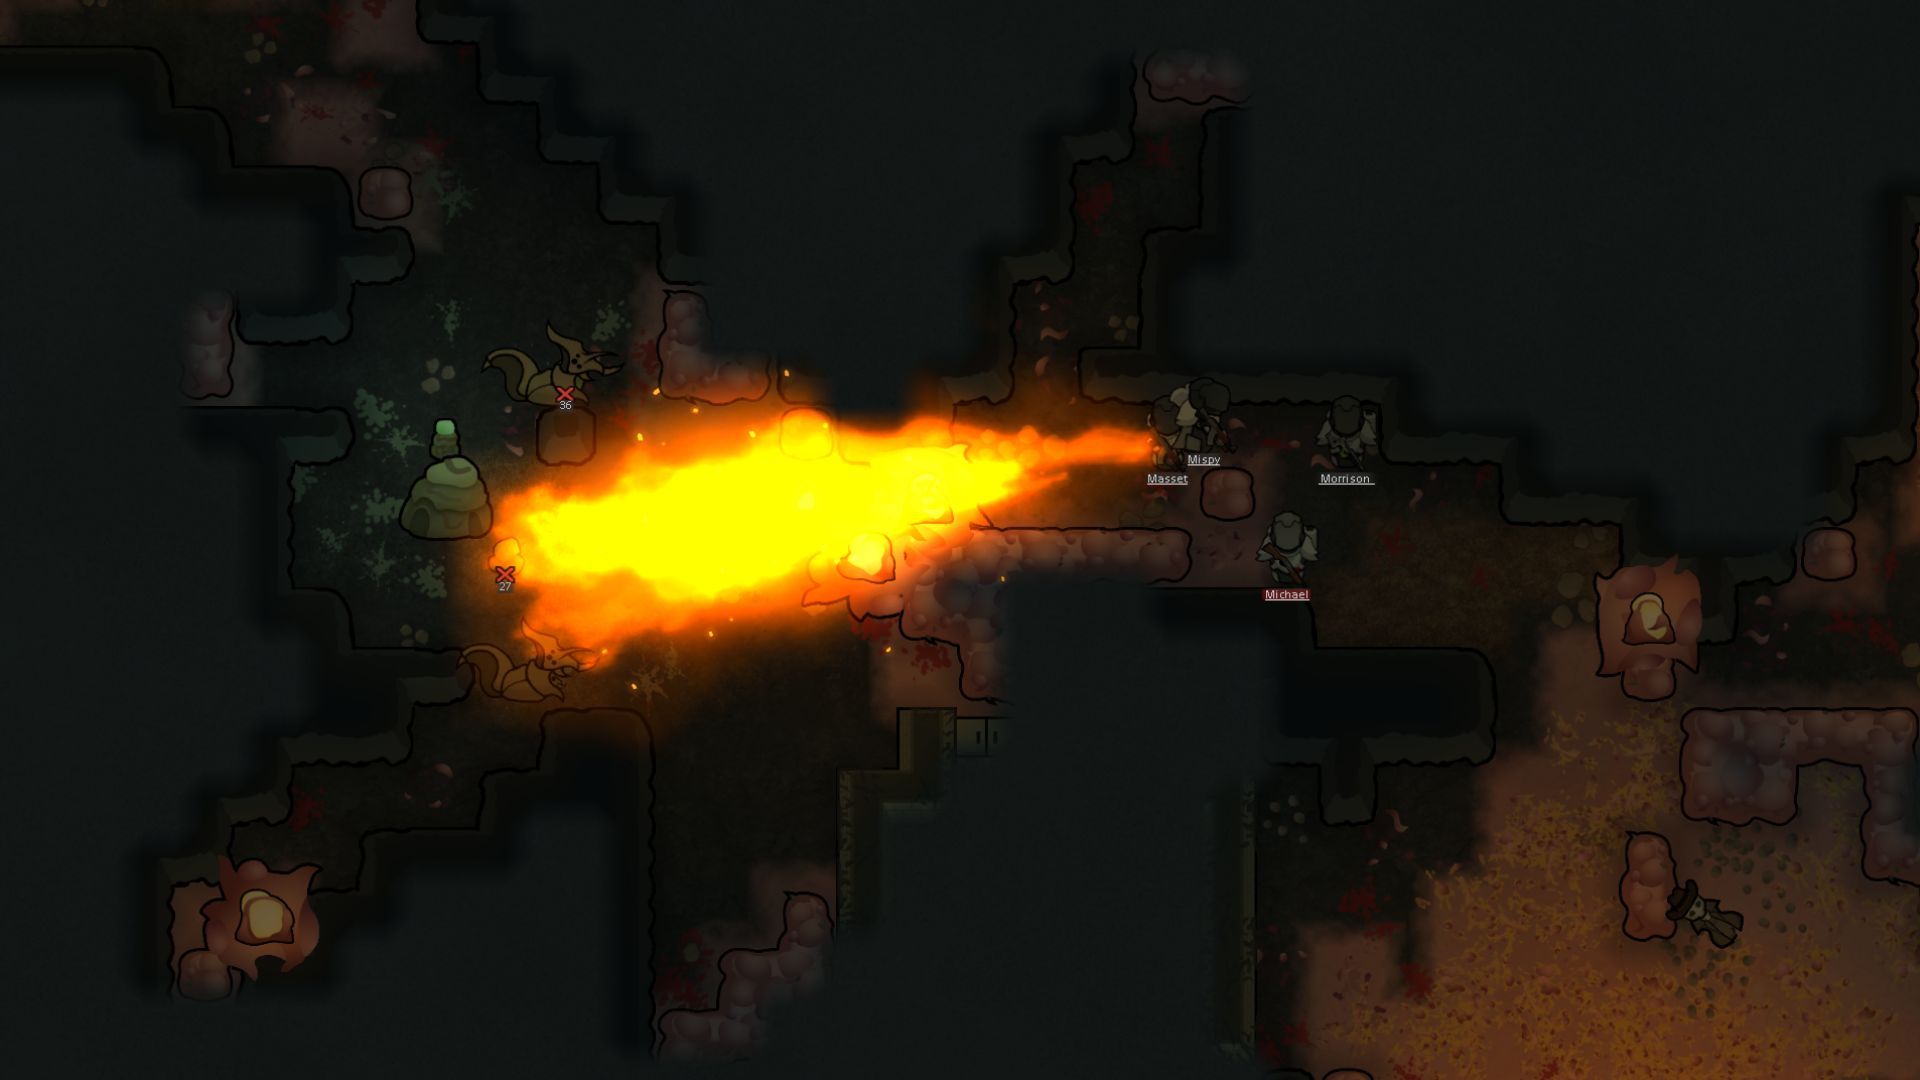 A pawn uses the Hellcat Rifle's underbarrel flamethrower to clear out an underground infestation